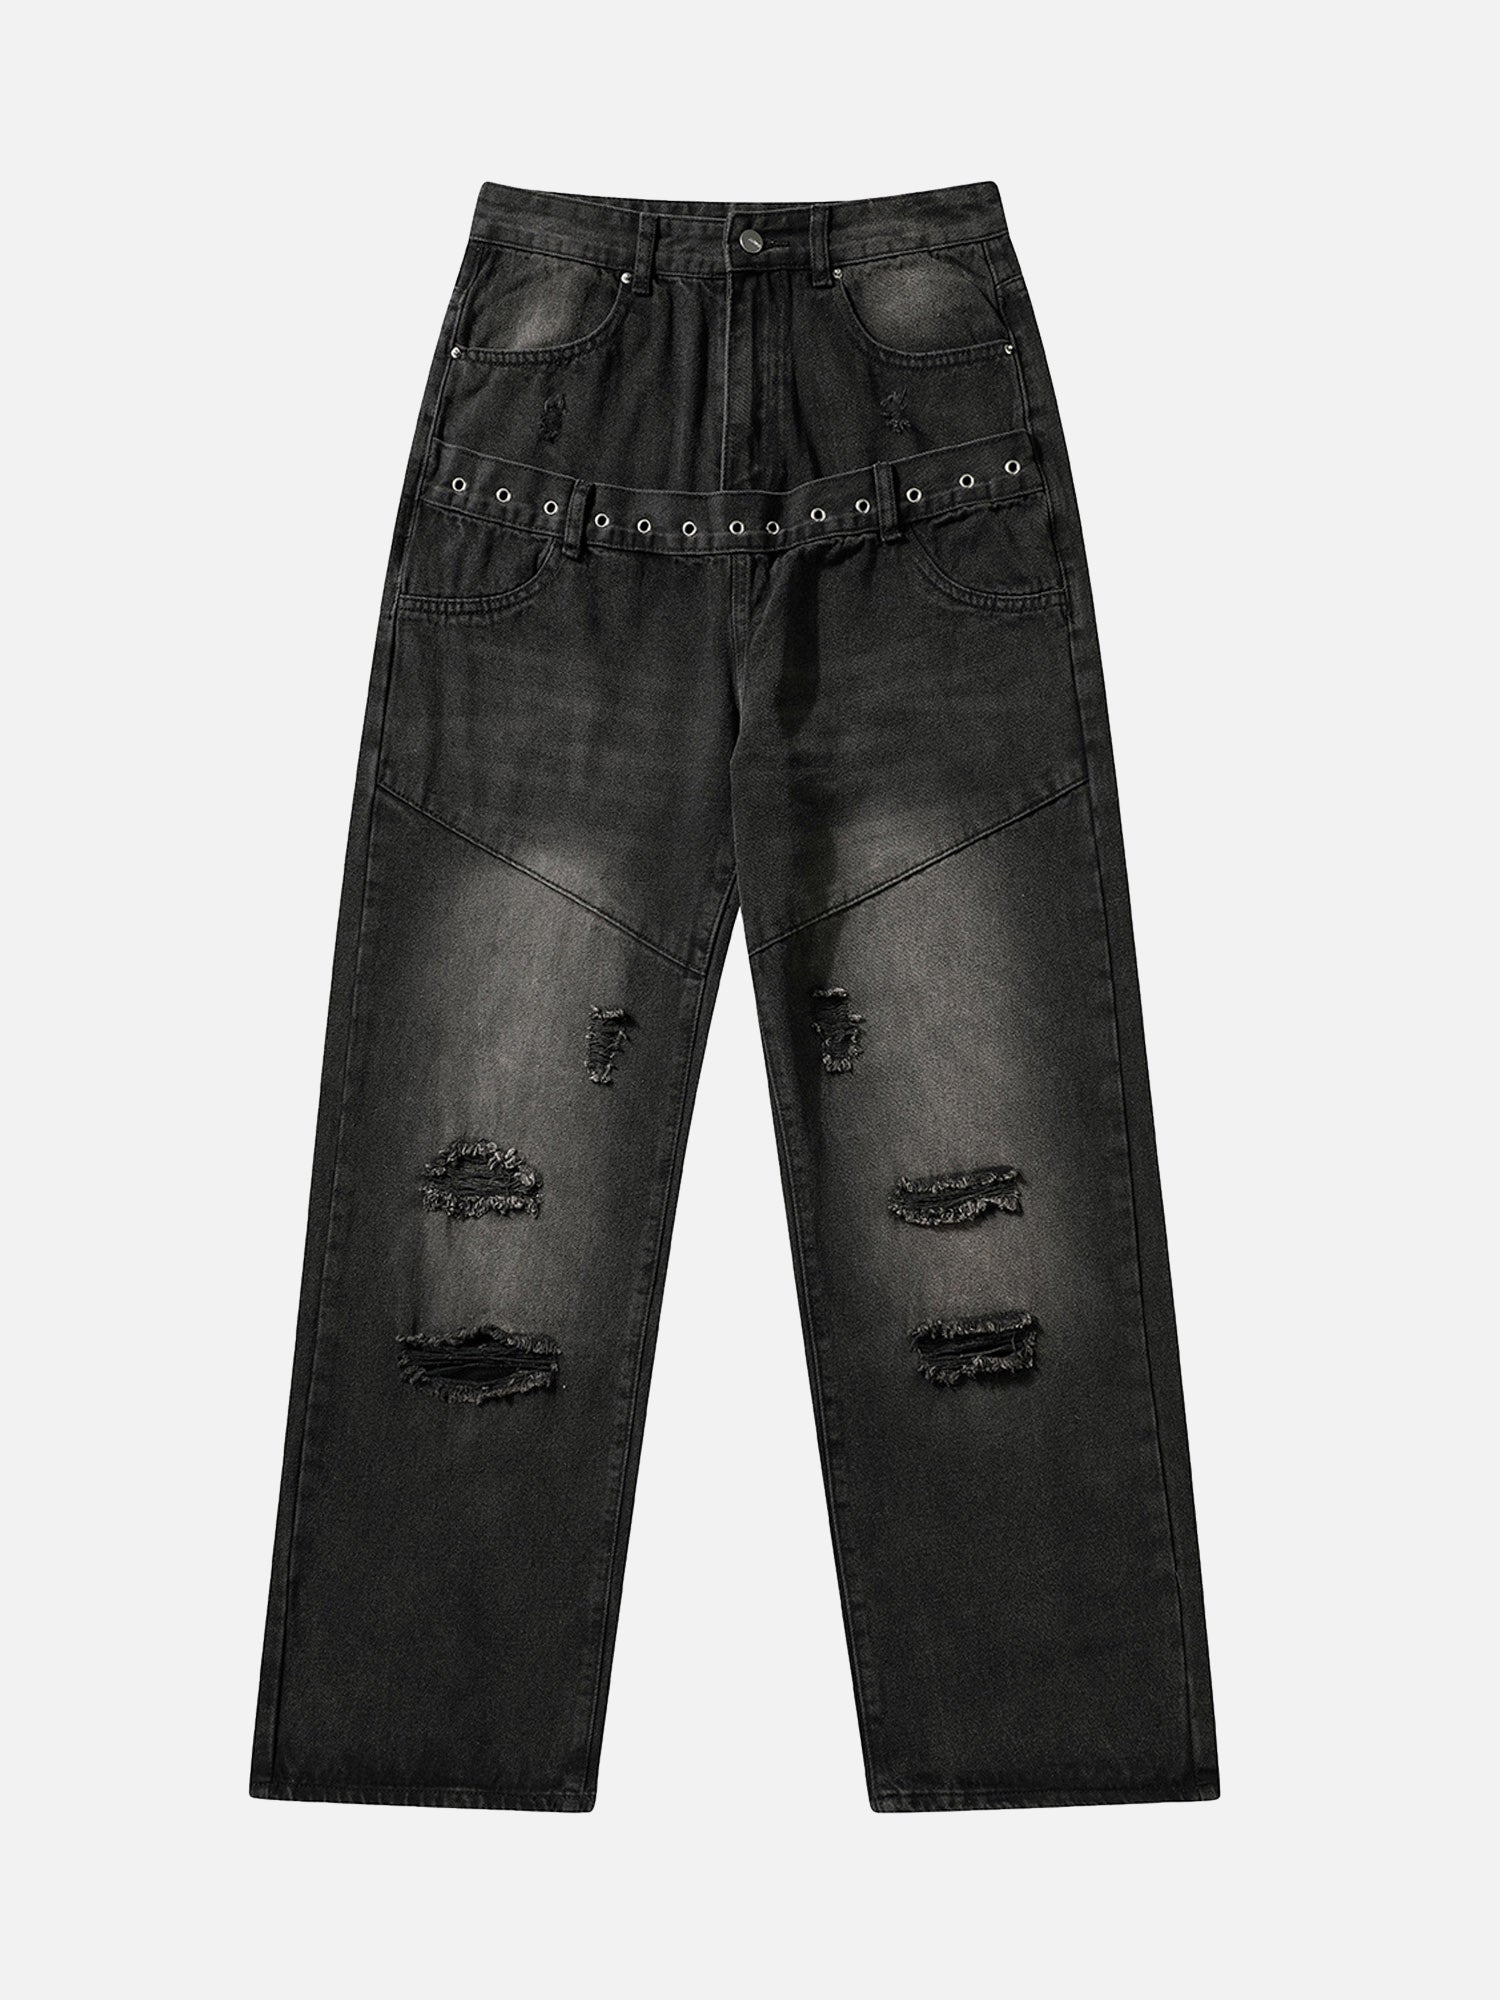 American High Street Design Washed Distressed Jeans